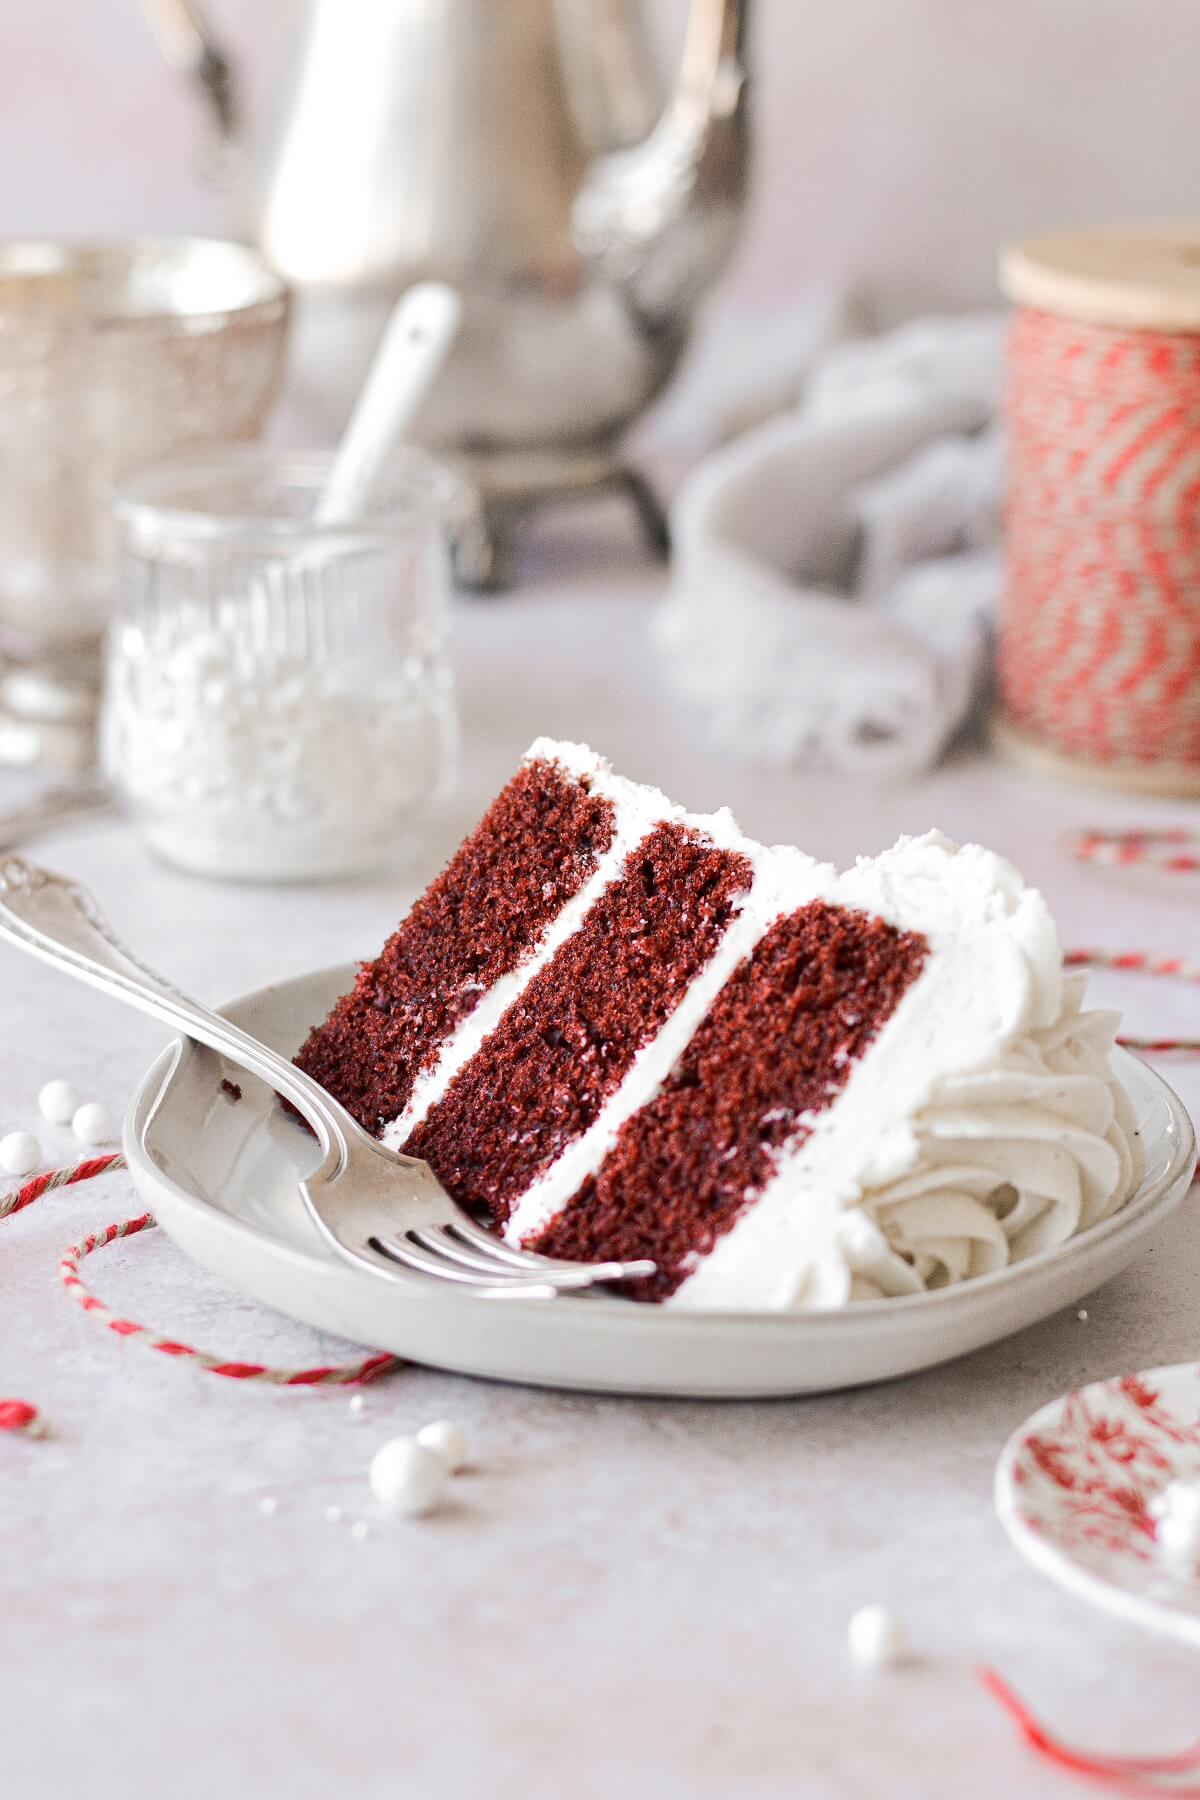 A slice of red velvet cake on a plate with a vintage silver fork.